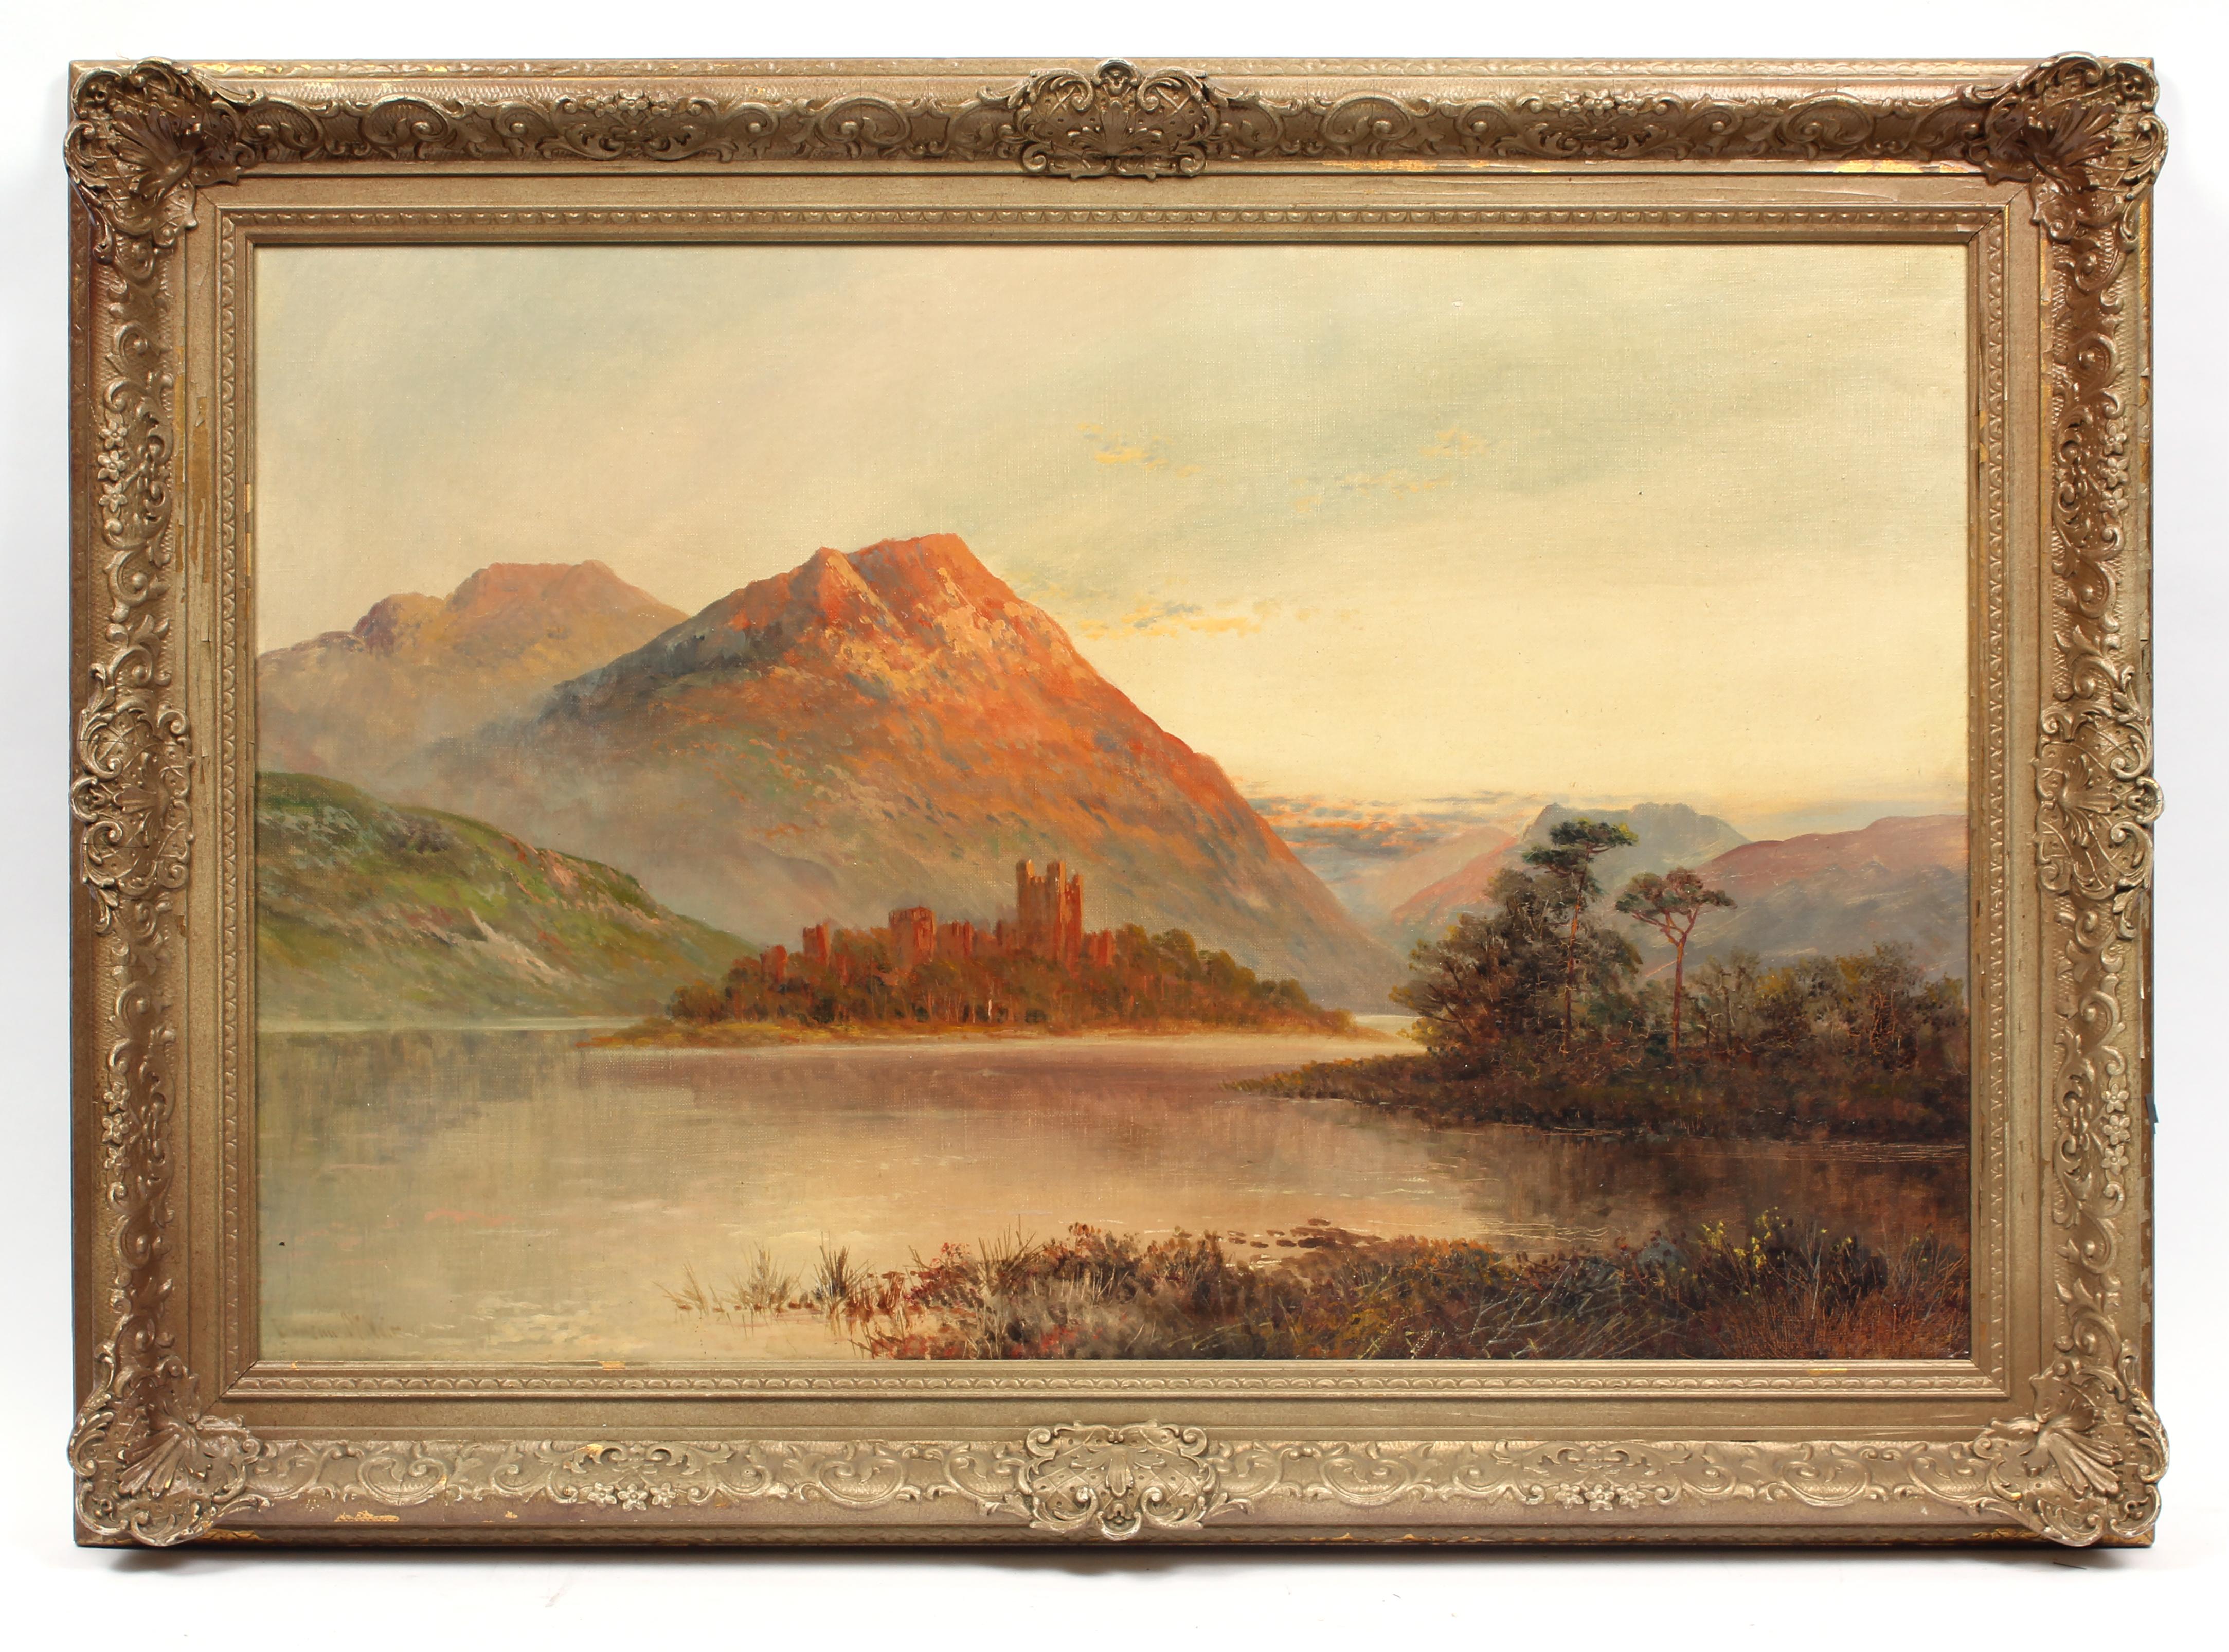 Unknown Landscape Painting - Antique Oil Painting Gold Frame 19th Century River Sunset Mountain Castle Rare